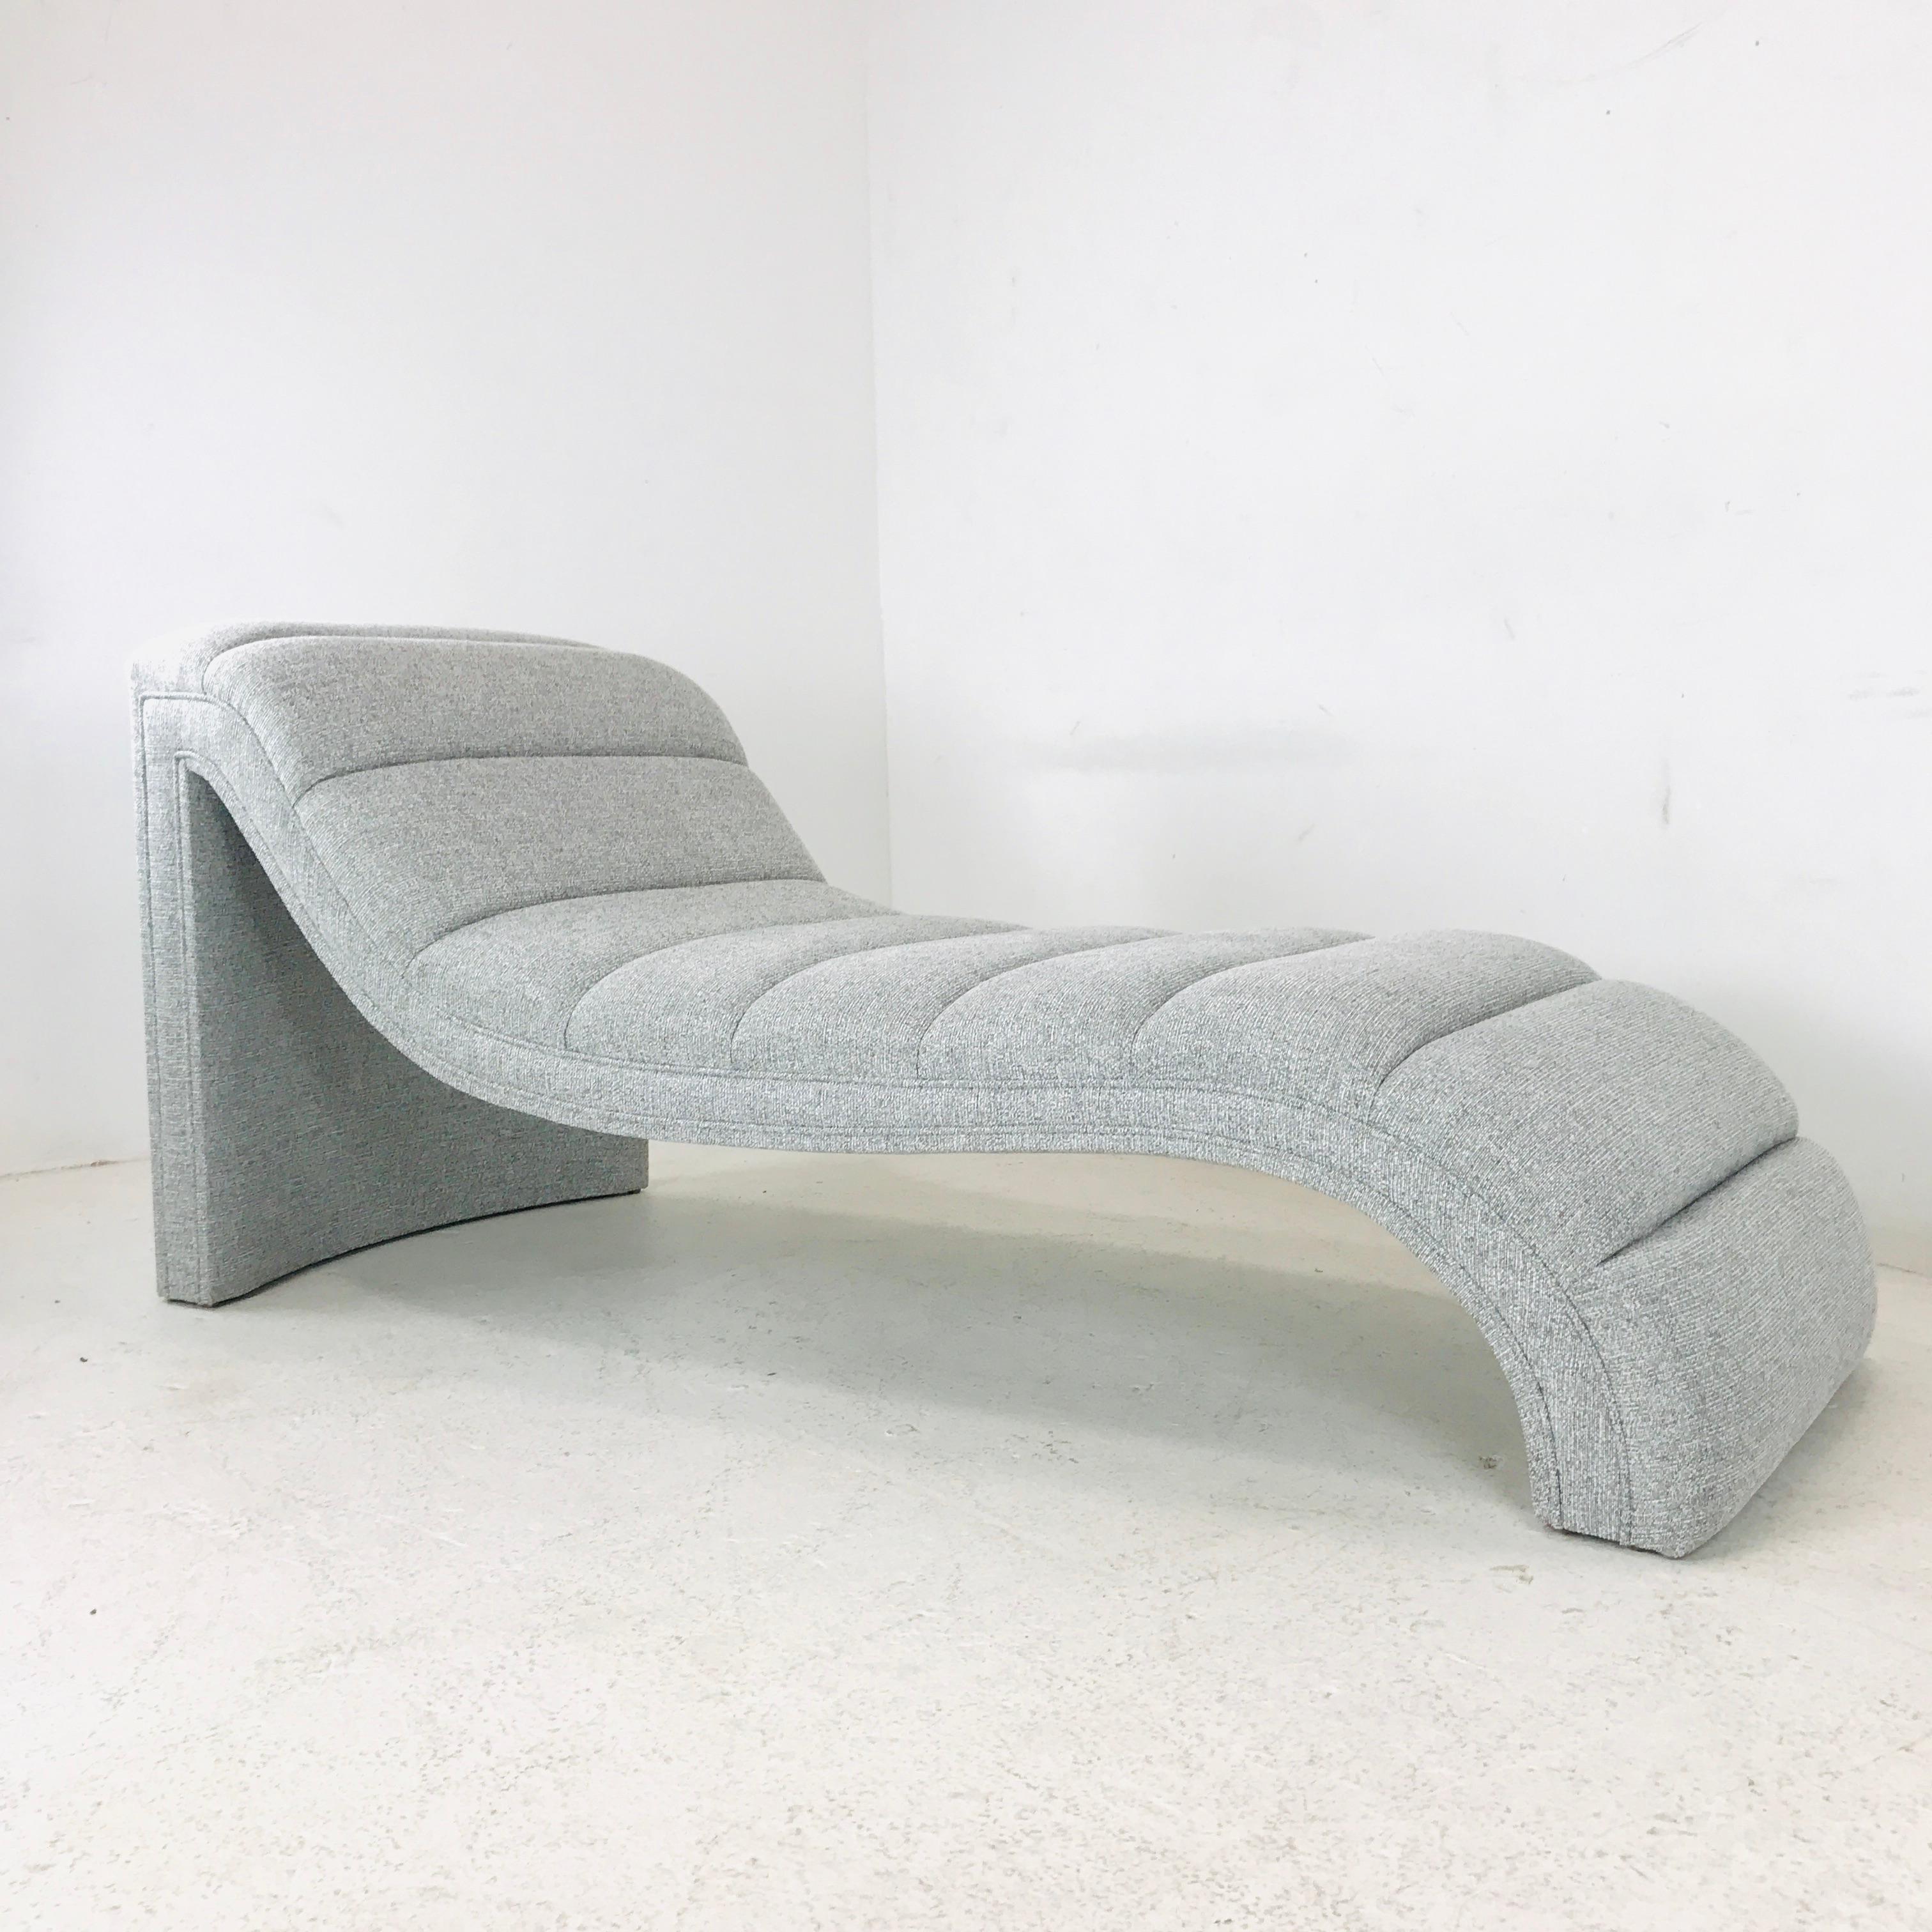 Chaise lounge, custom. Available in the fabric pictured here for $5,400 or can be custom made with 13 yards COM for $5,100. 
For custom orders please allow a 6-8 week lead time.

Dimensions: 66